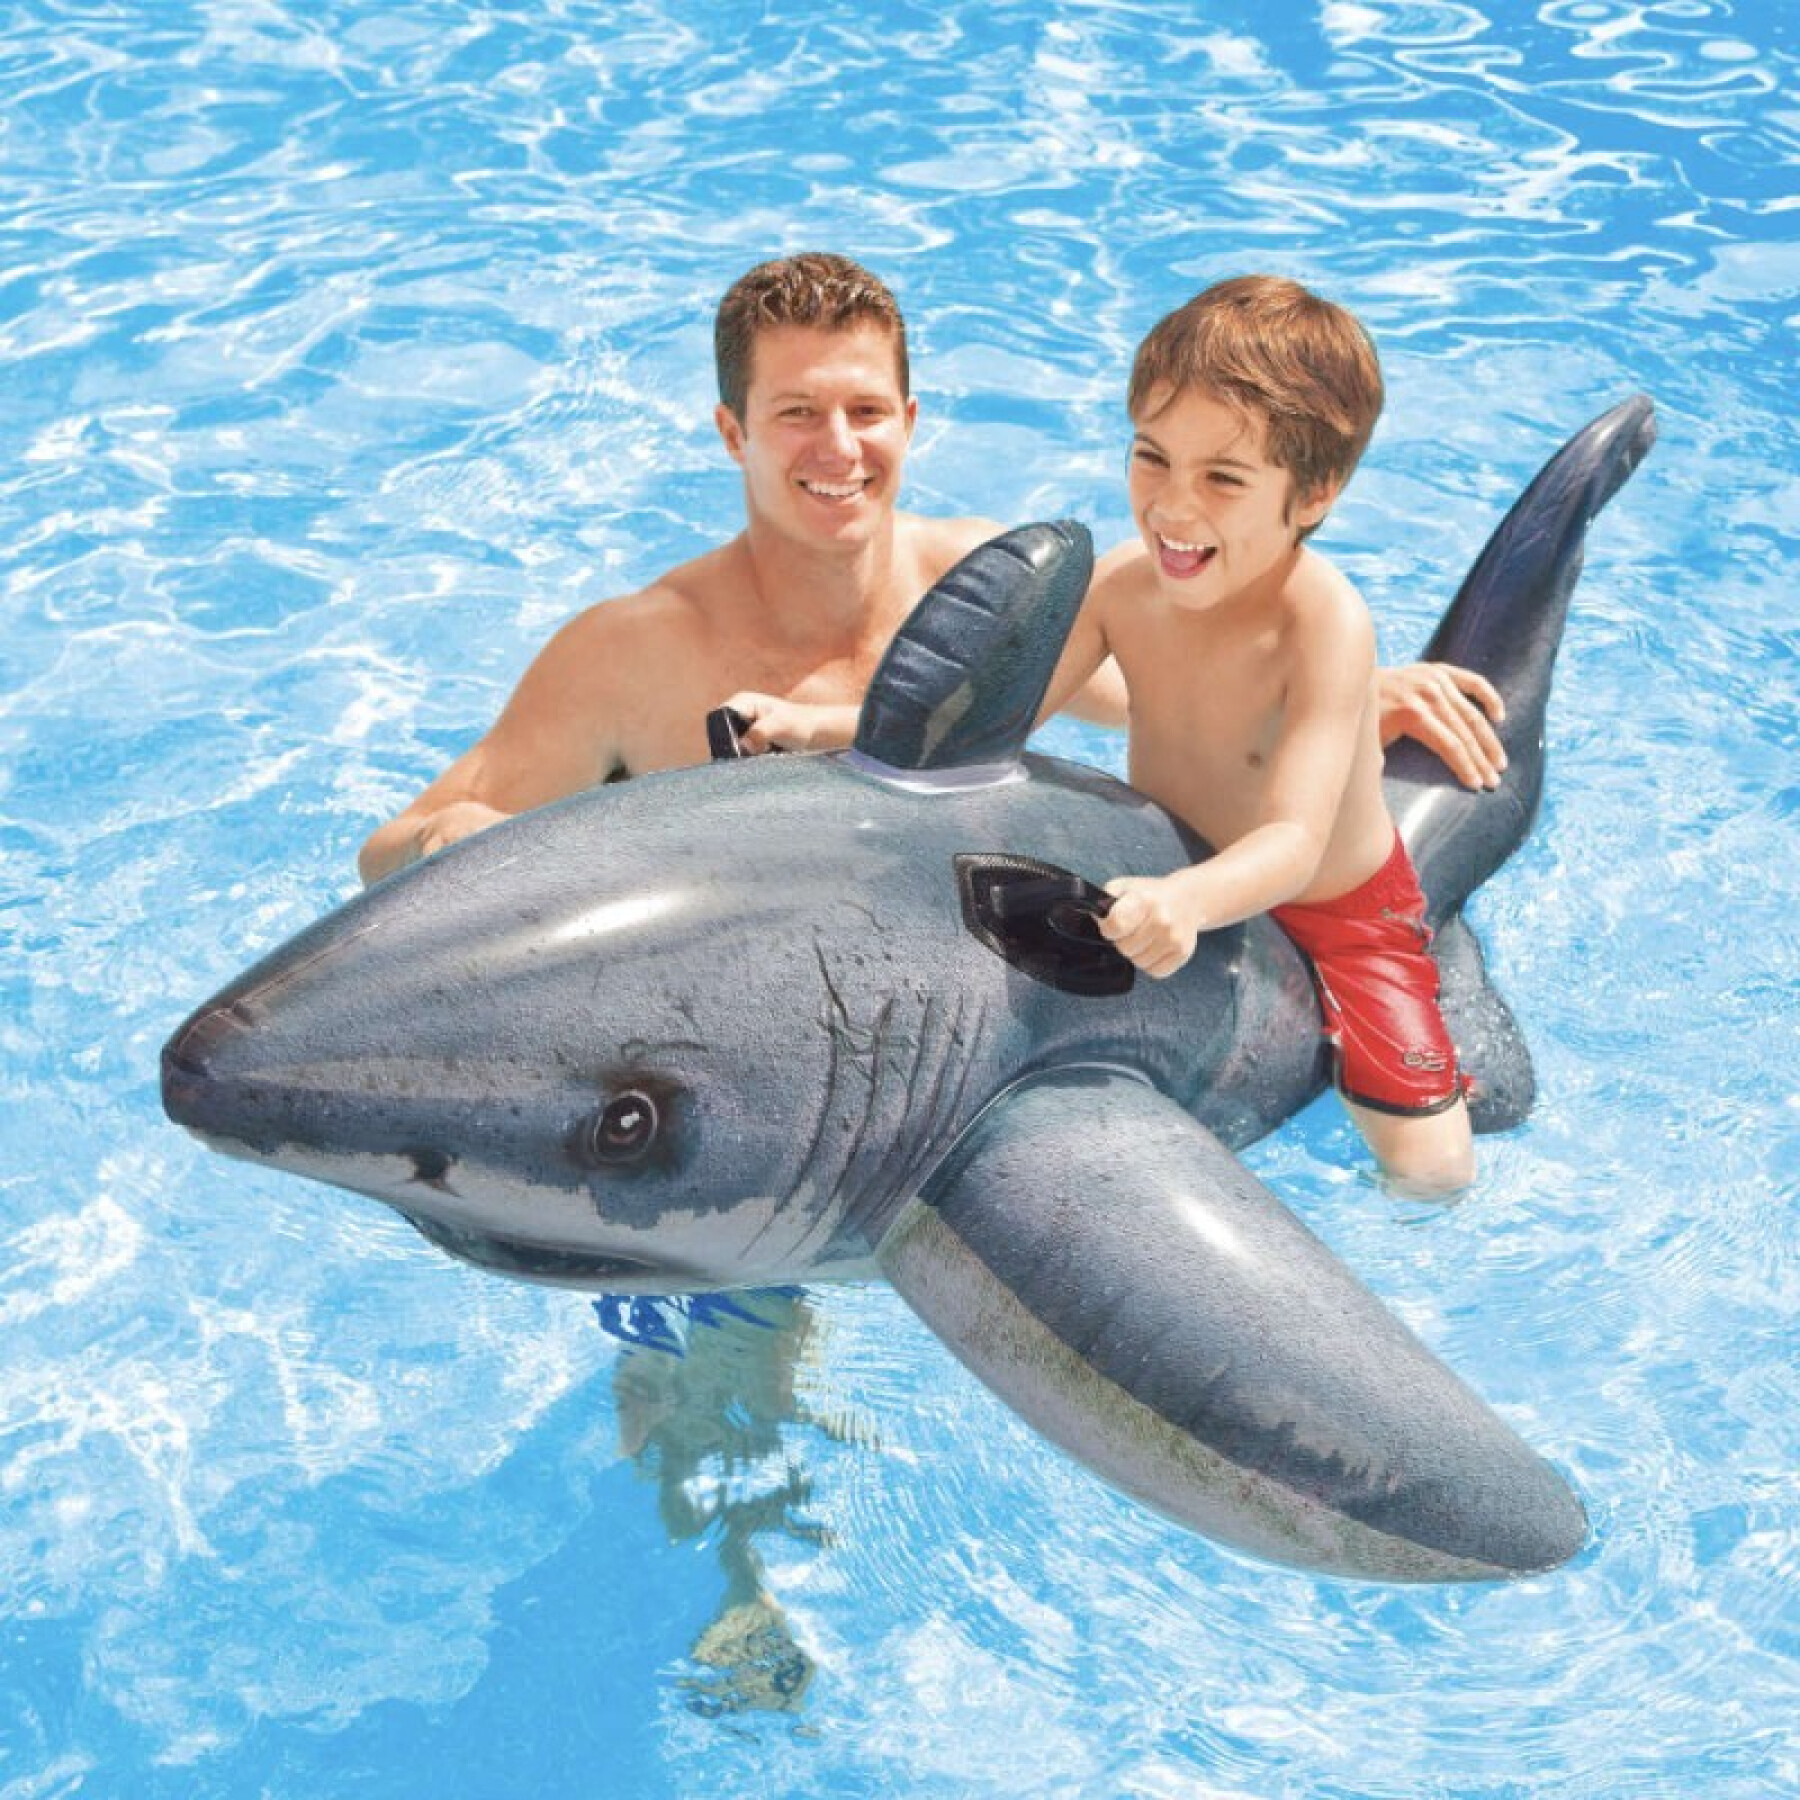 Large shark buoy for children to ride on Intex